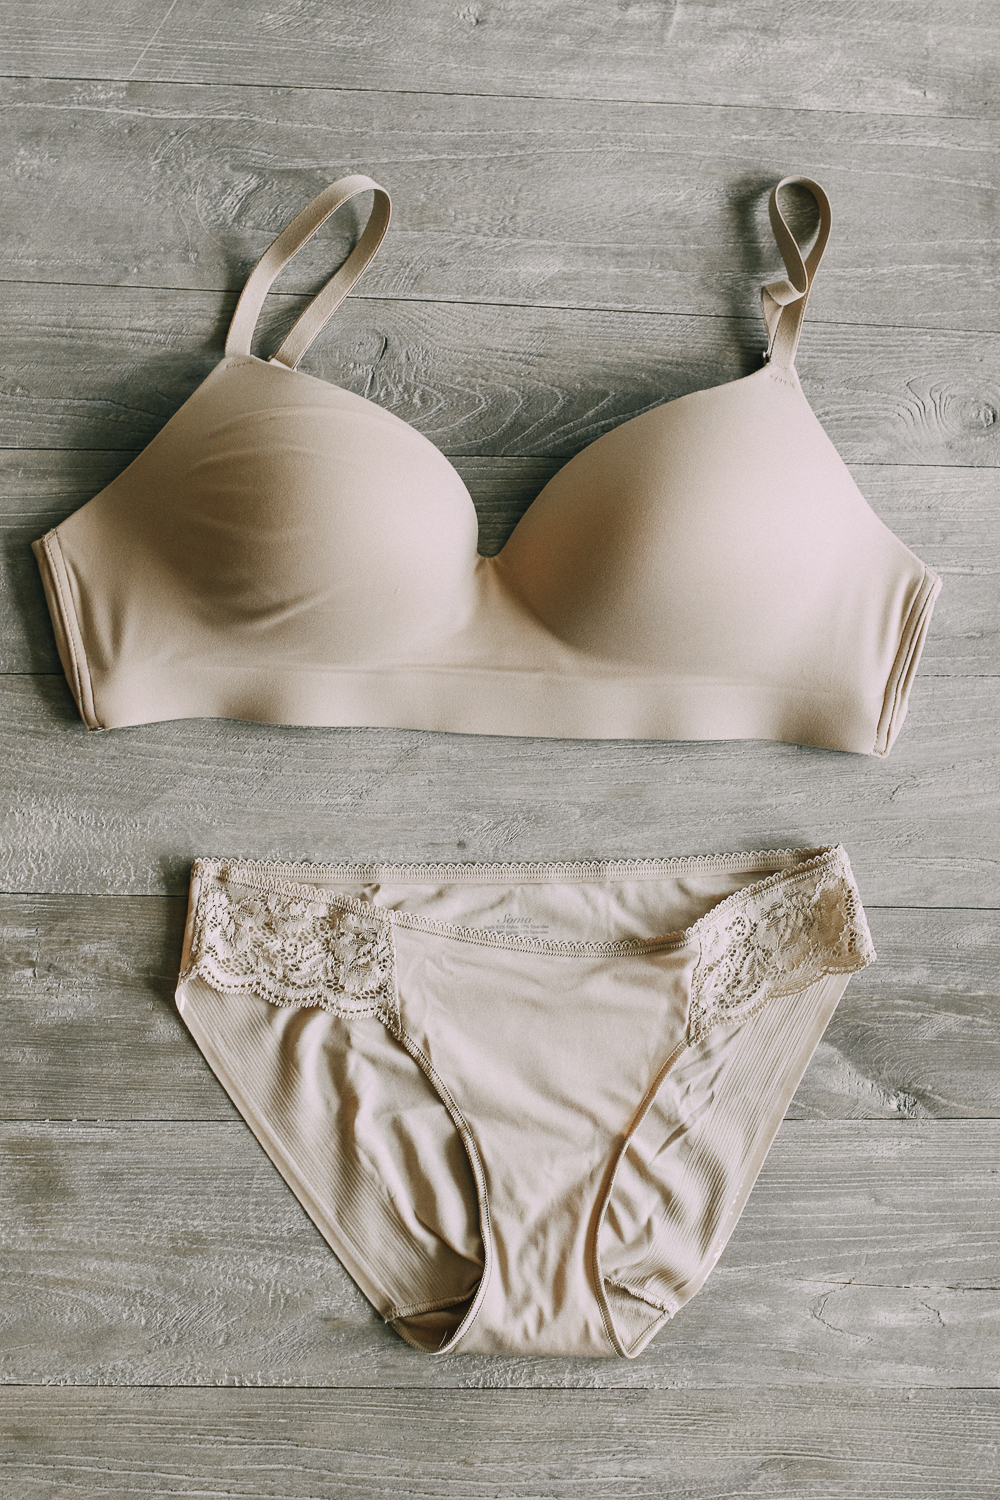 Best wireless bra, the Enbliss by Soma Intimates with vanishing edge or no show panties